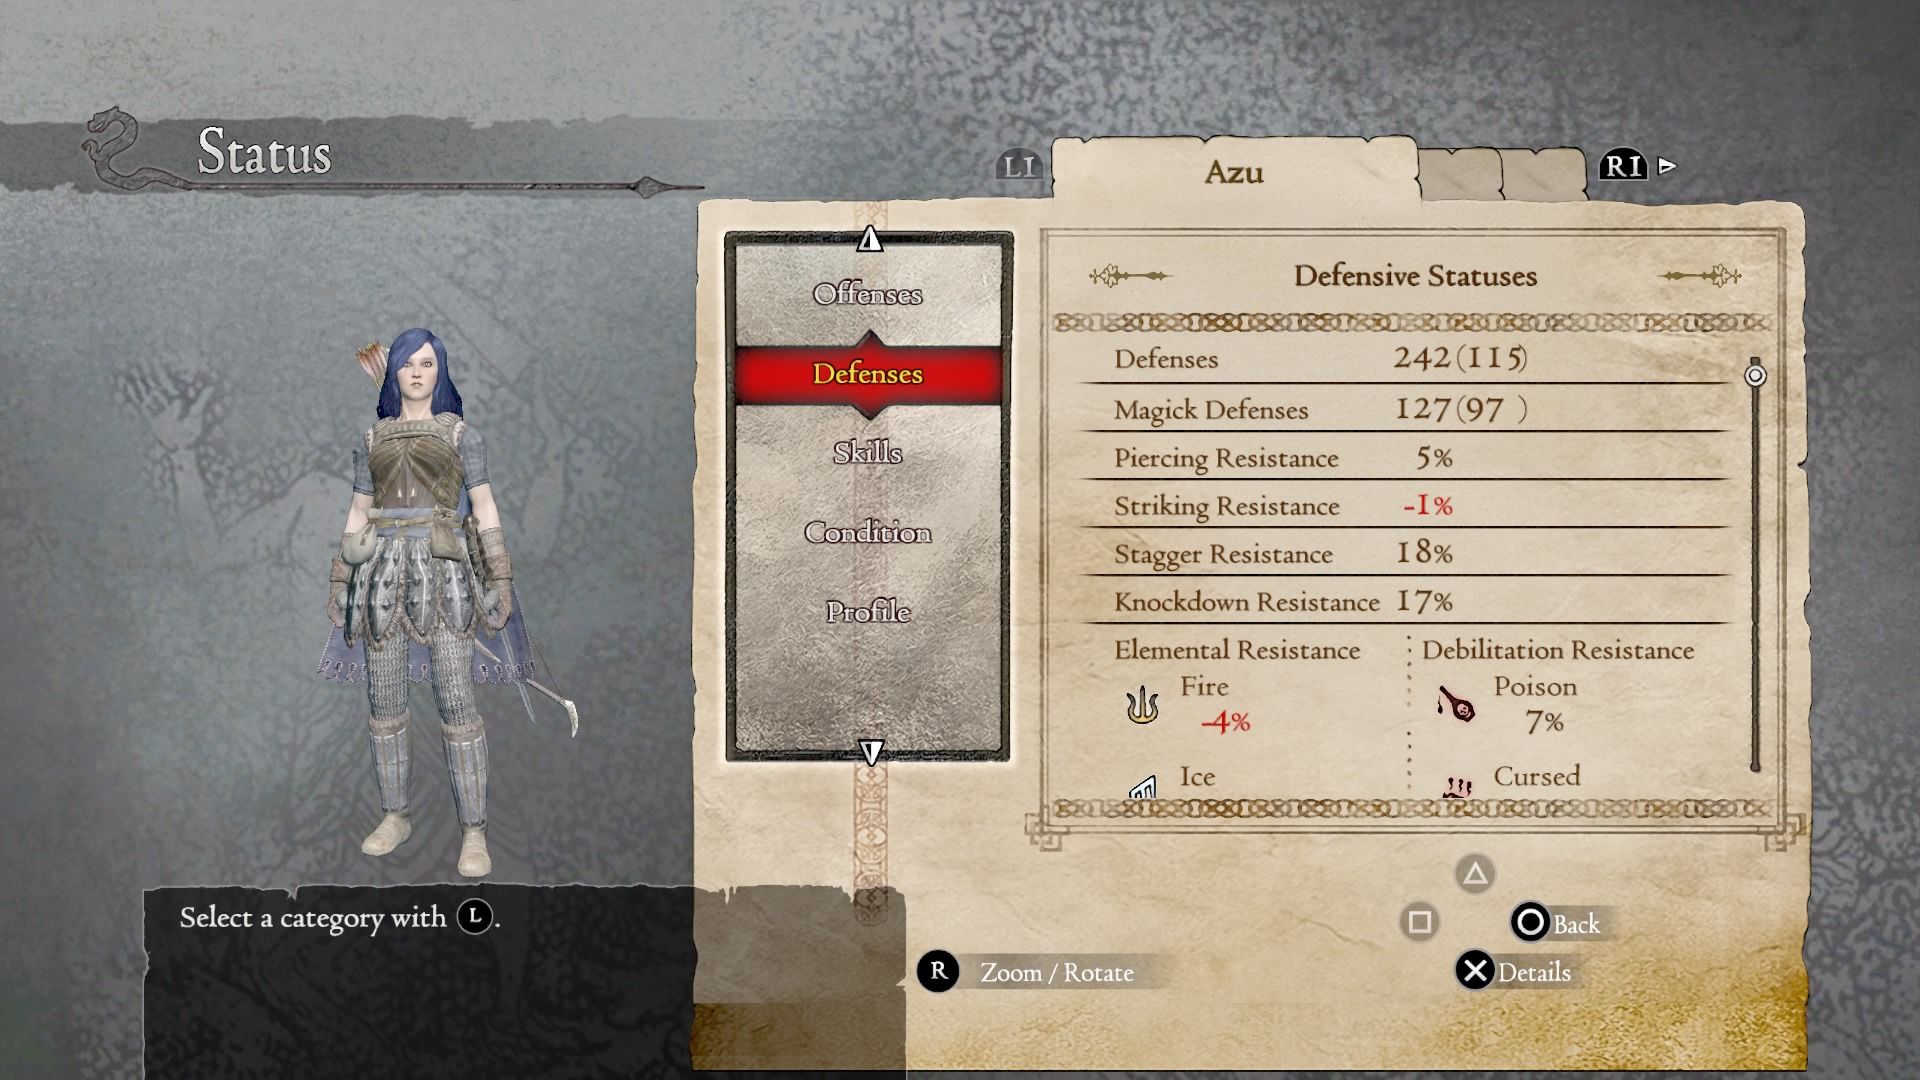 A screenshot showing the defesive statuses of a character named Azu.